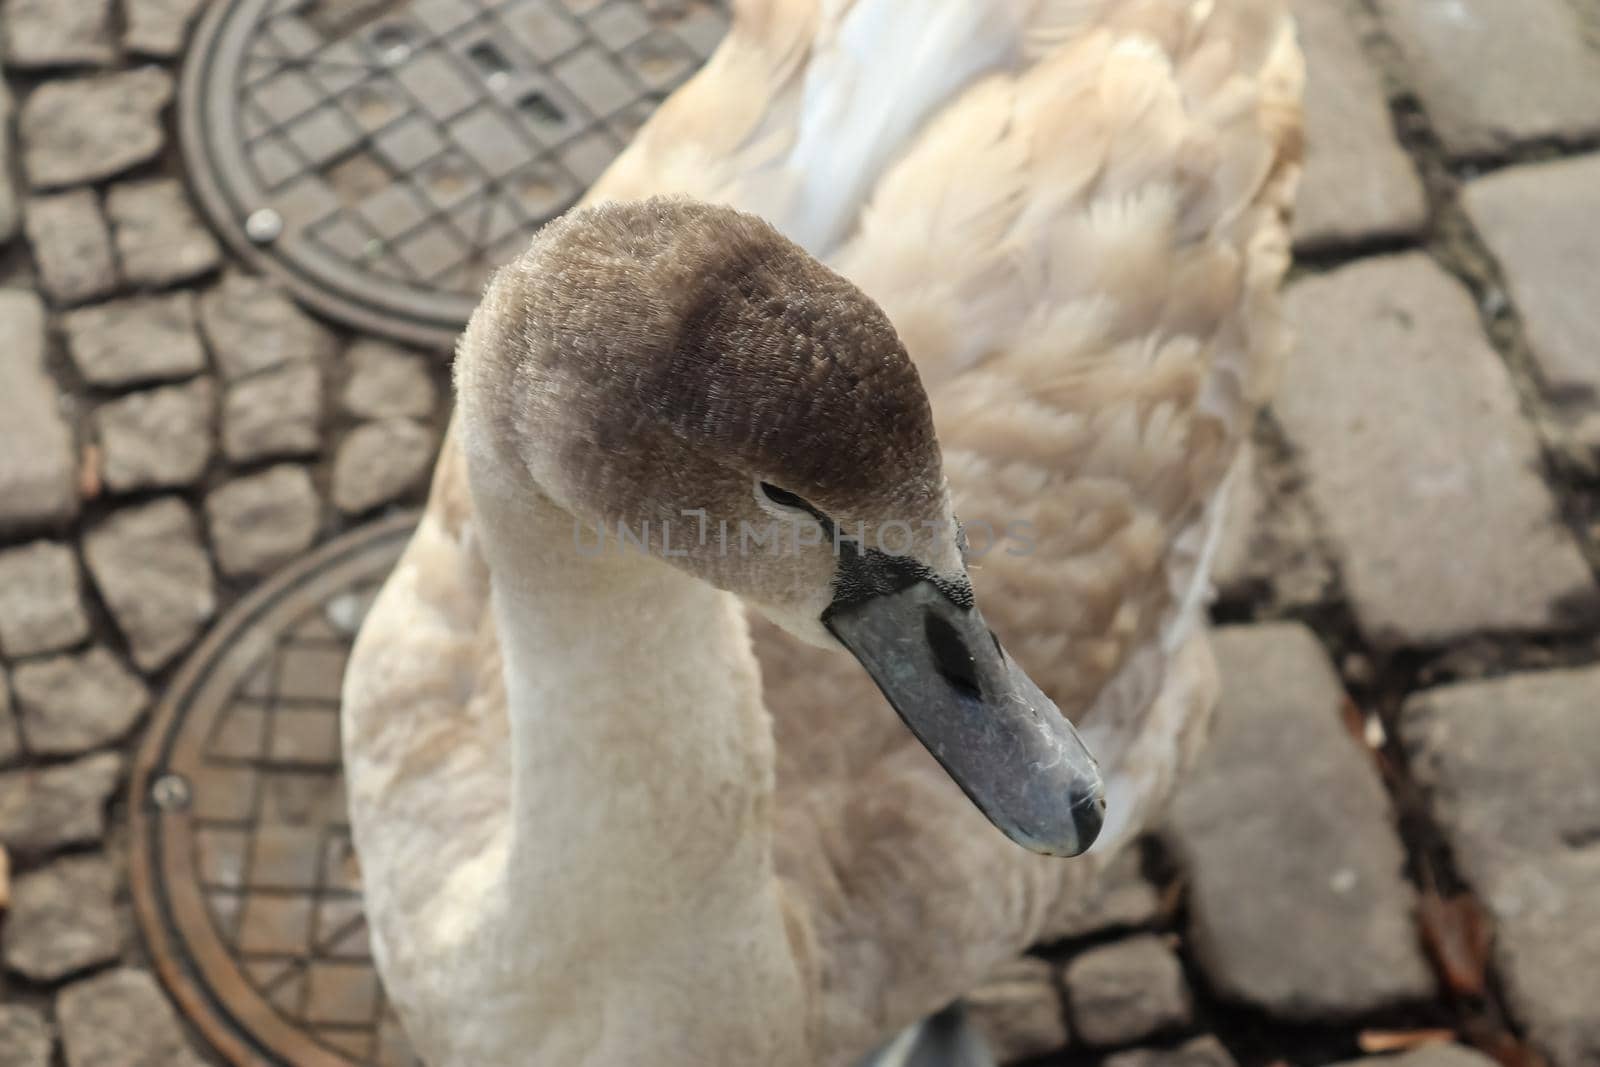 Swan walking on a cobblestone path close to the water in a port